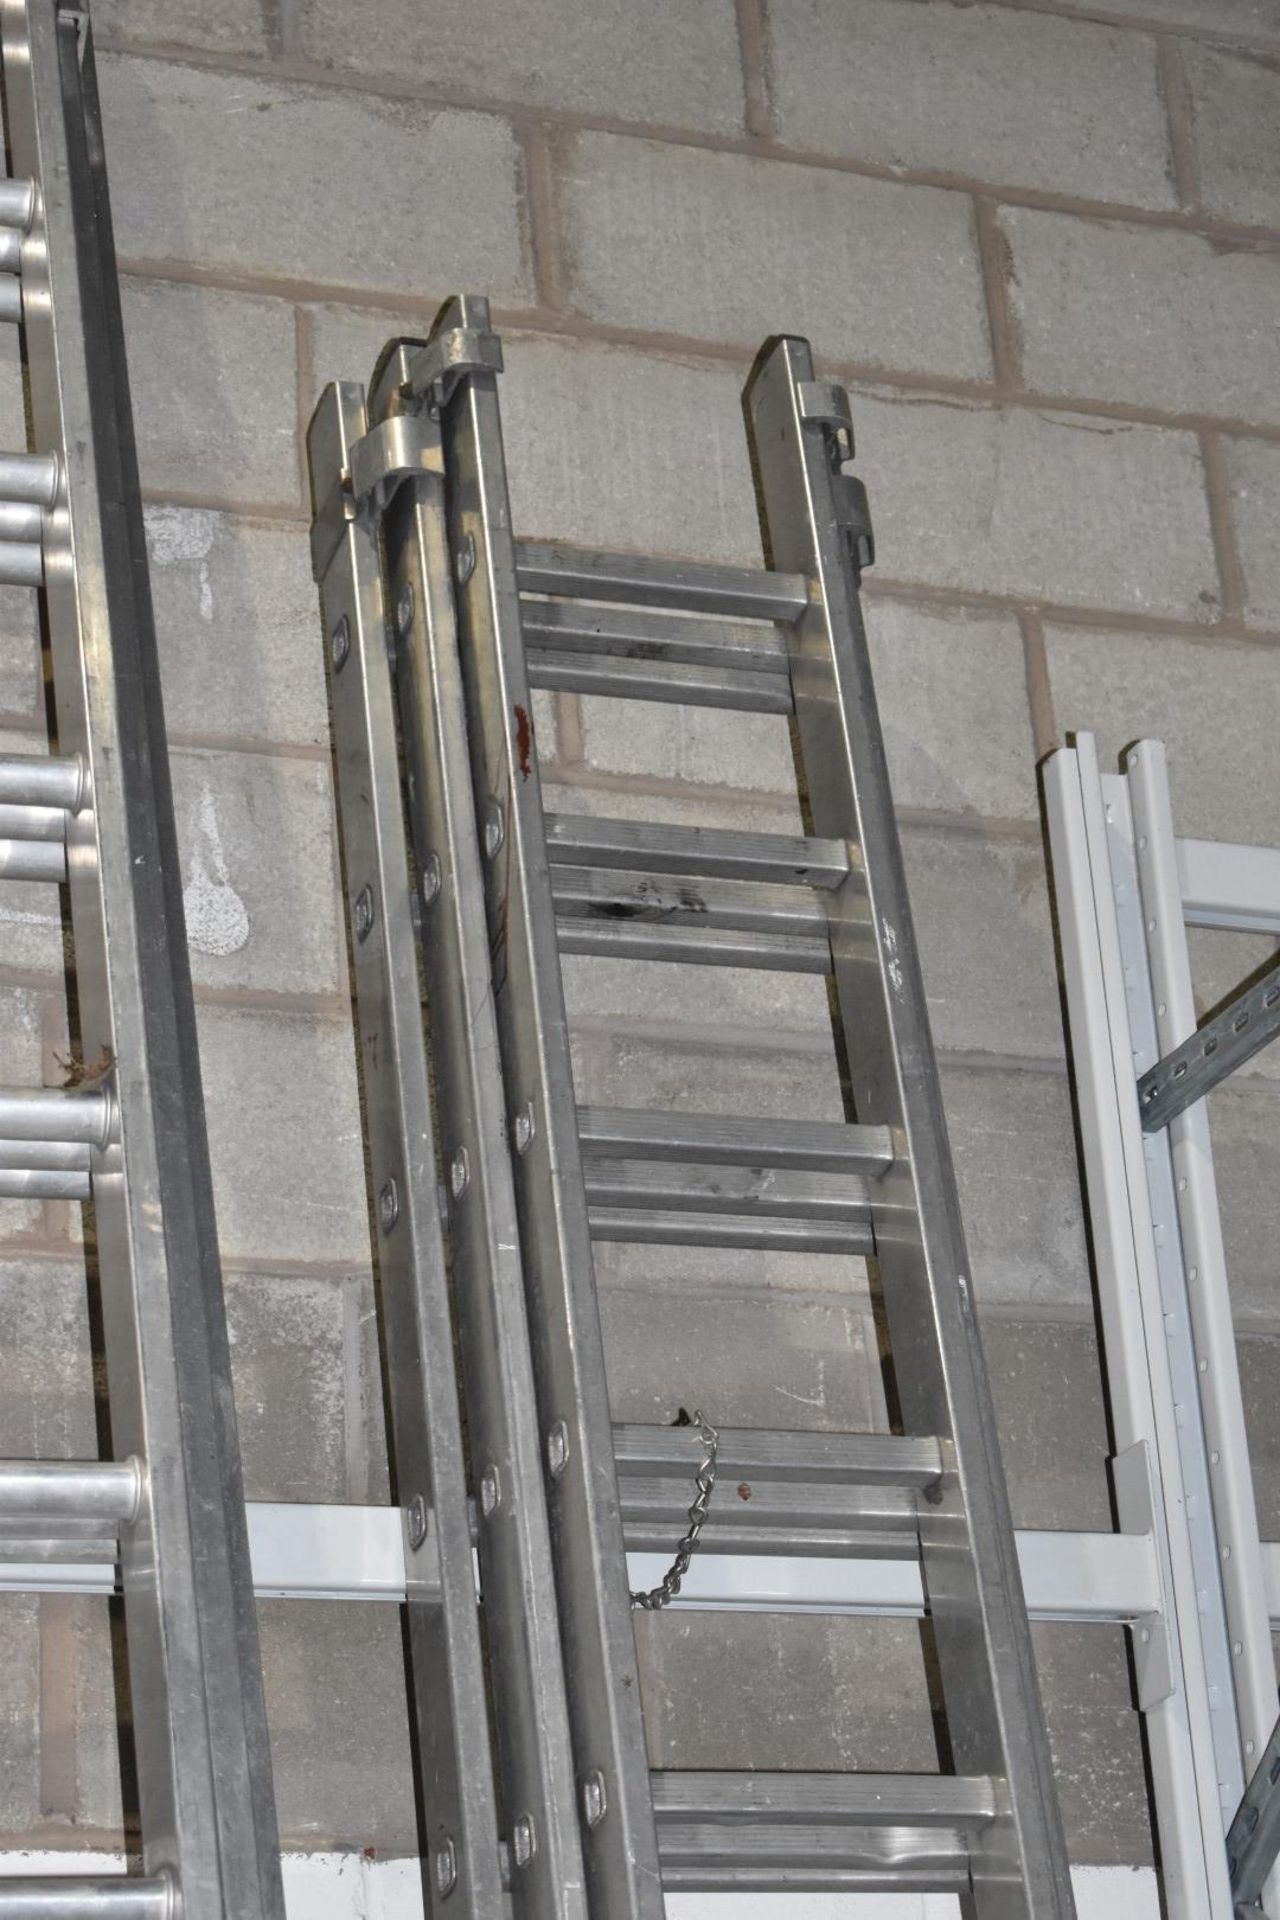 1 x Youngman DIY 3 Section Aluminium Ladders Each Section Measures 350cm SRB132 - Image 2 of 6